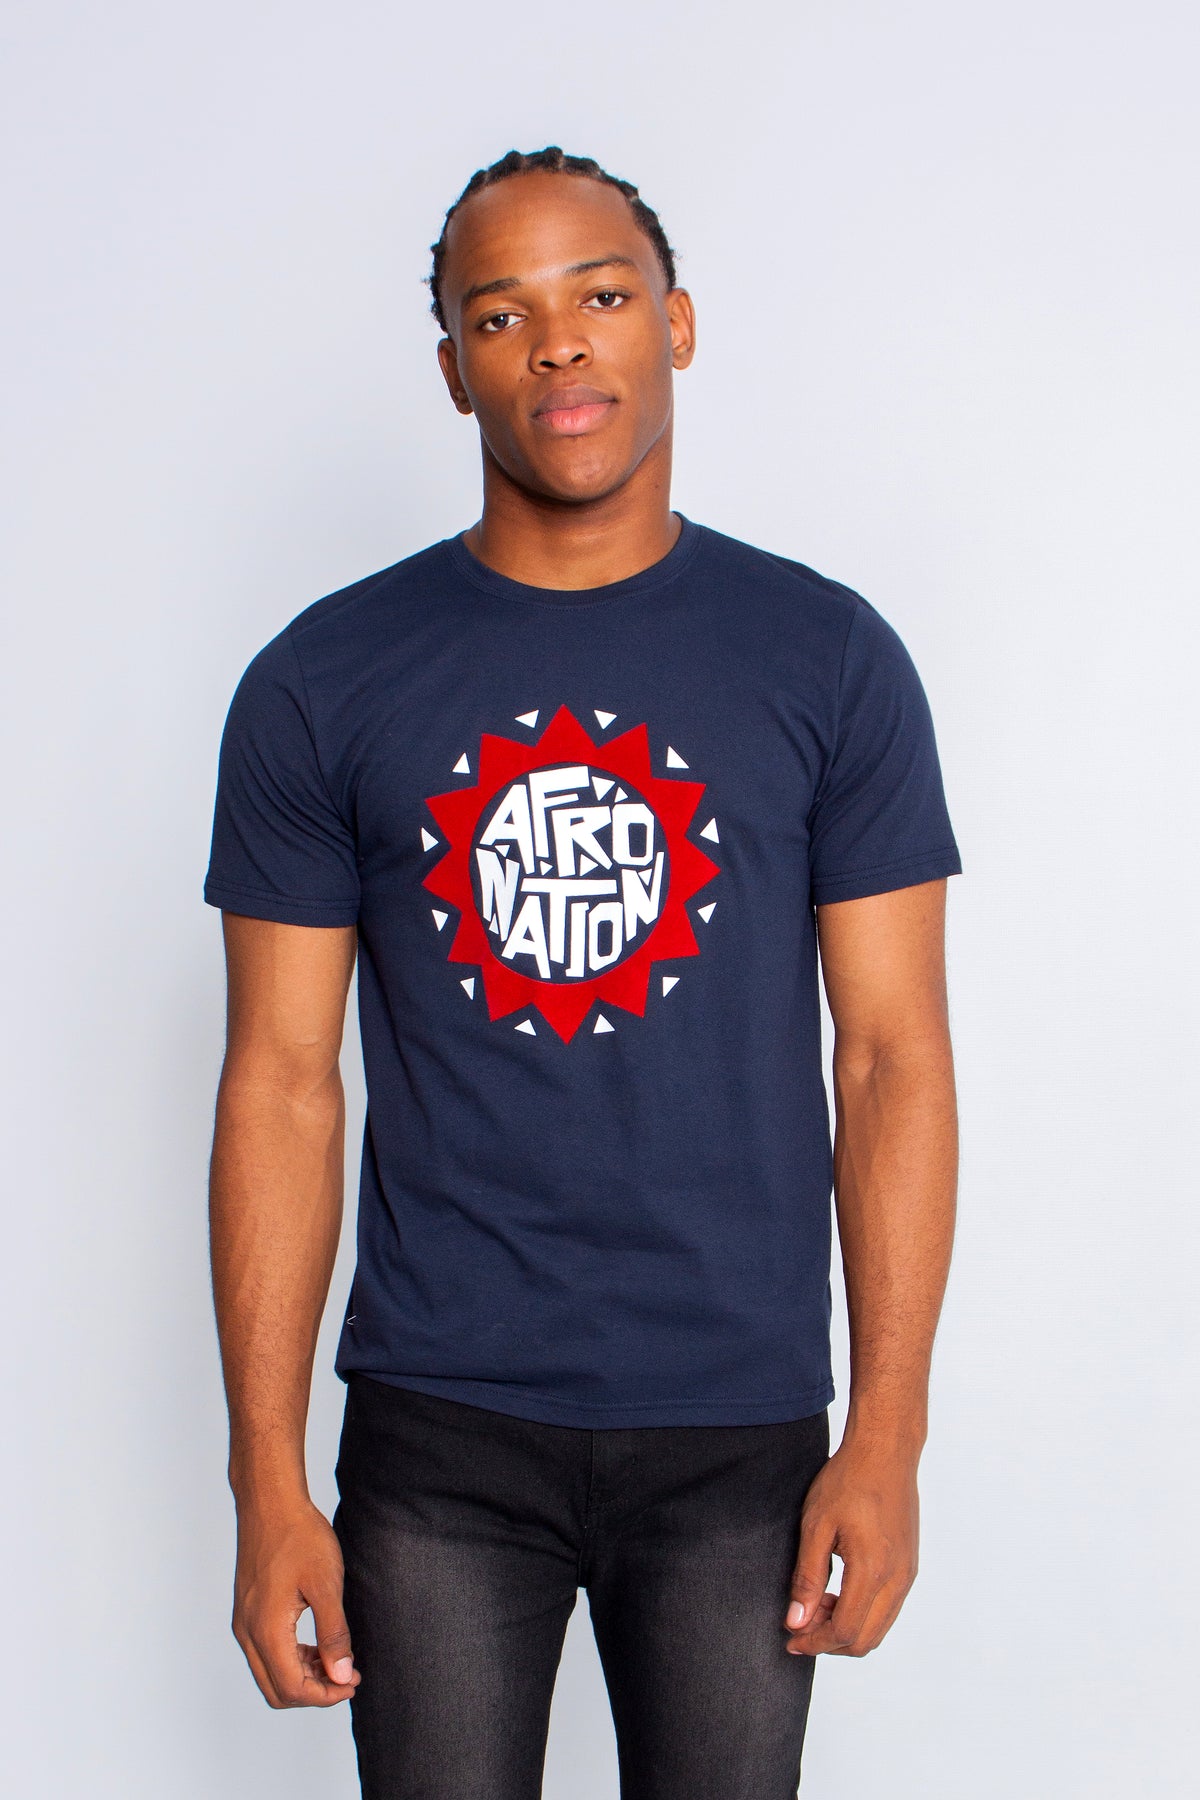 Statement t-shirt Clothing Junction